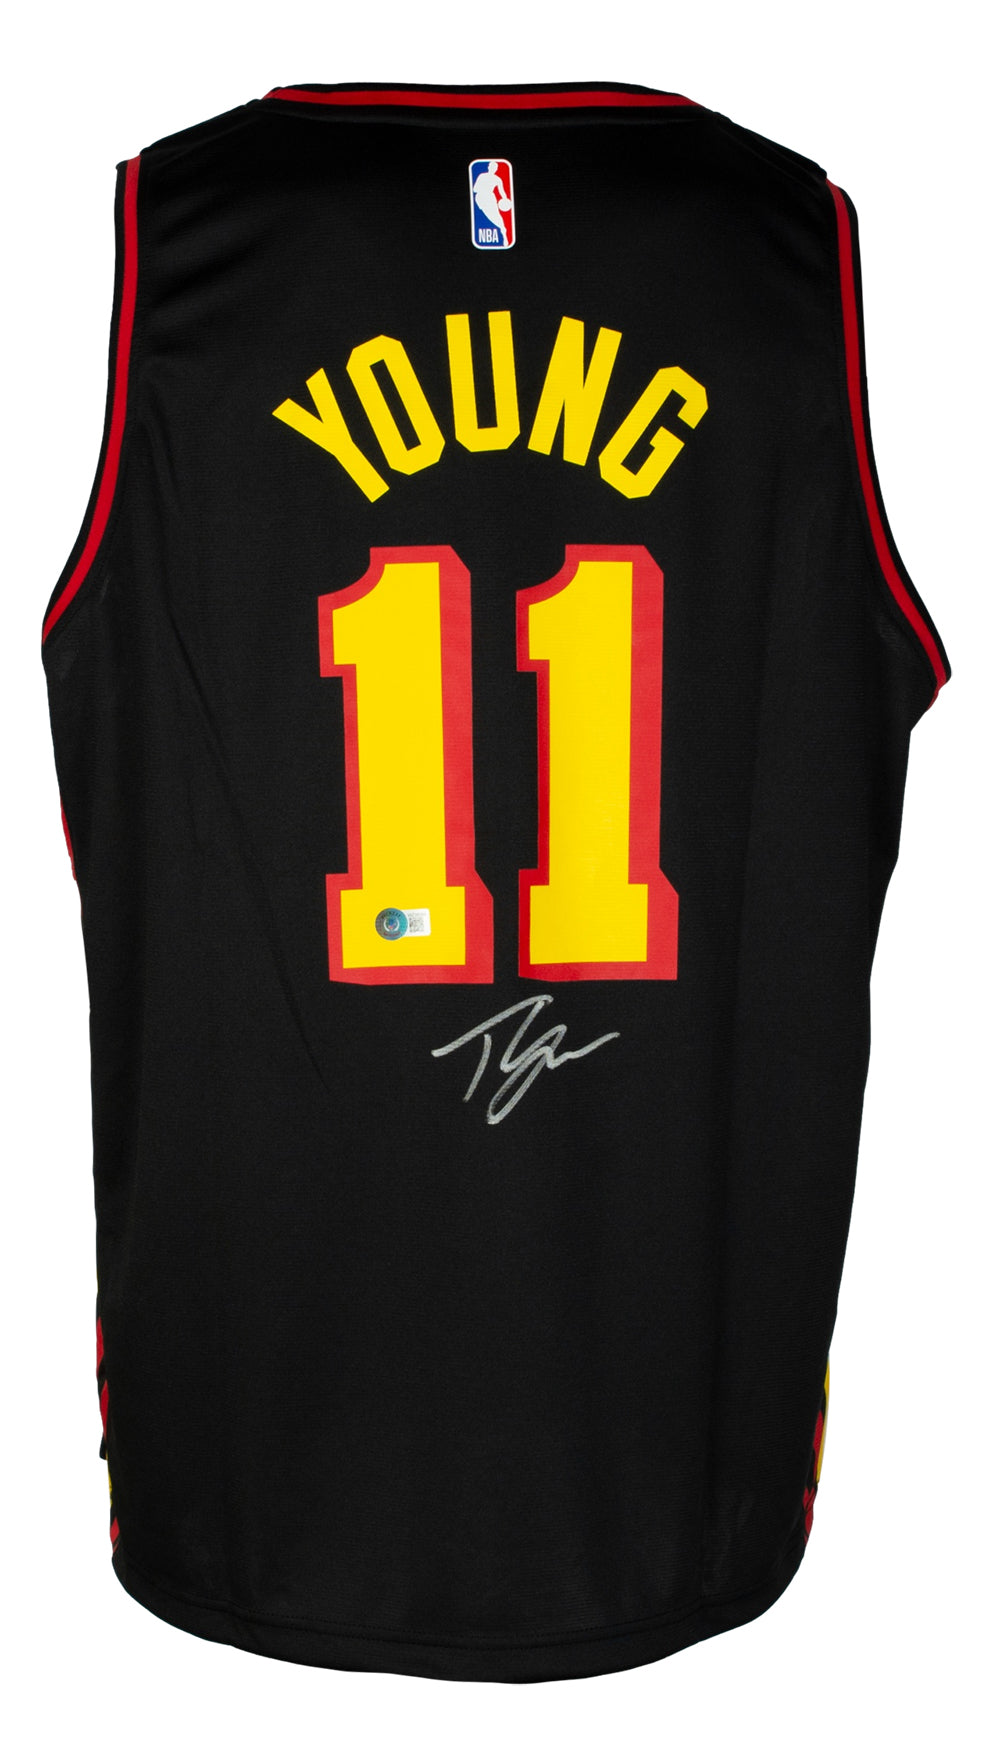 Trae Young Jerseys, Trae Young Hawks Jersey, Shirts